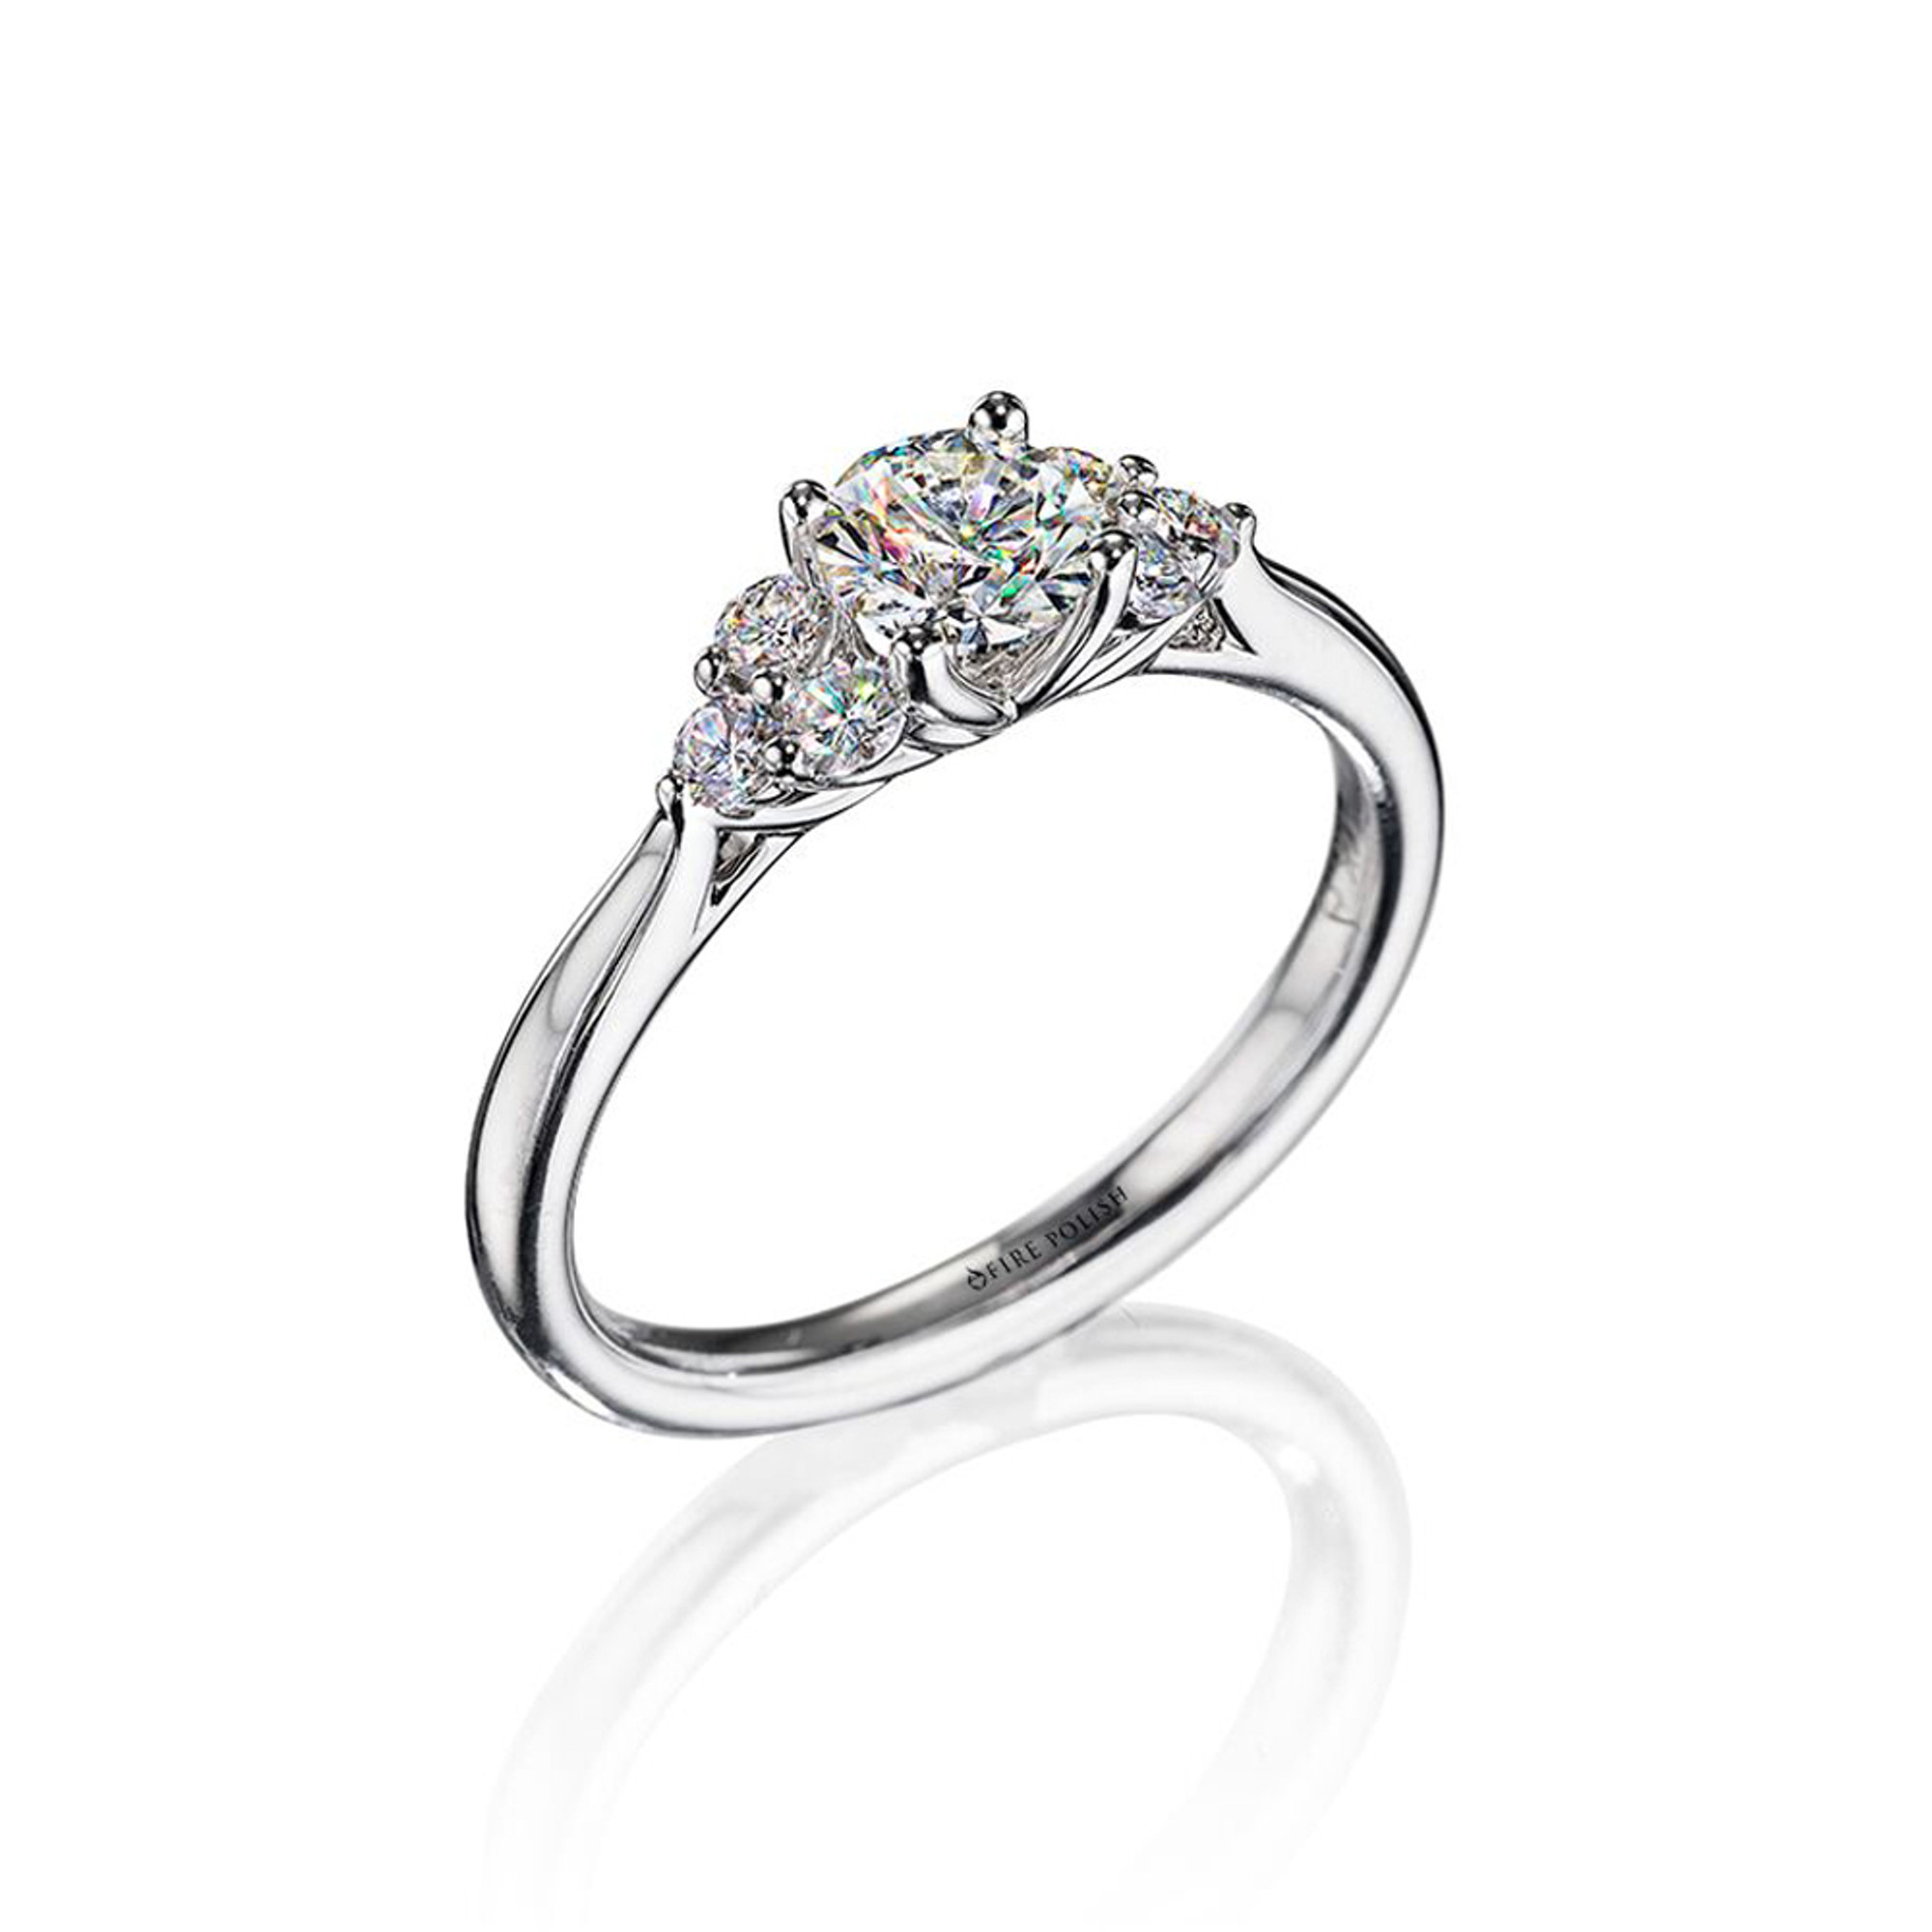 Luxury 925 Sterling Silver Cluster Wedding Ring Set With Crystal Solitaire  Stones For Womens Engagement And Wedding Jewelry From Weaverazelle, $5.75 |  DHgate.Com